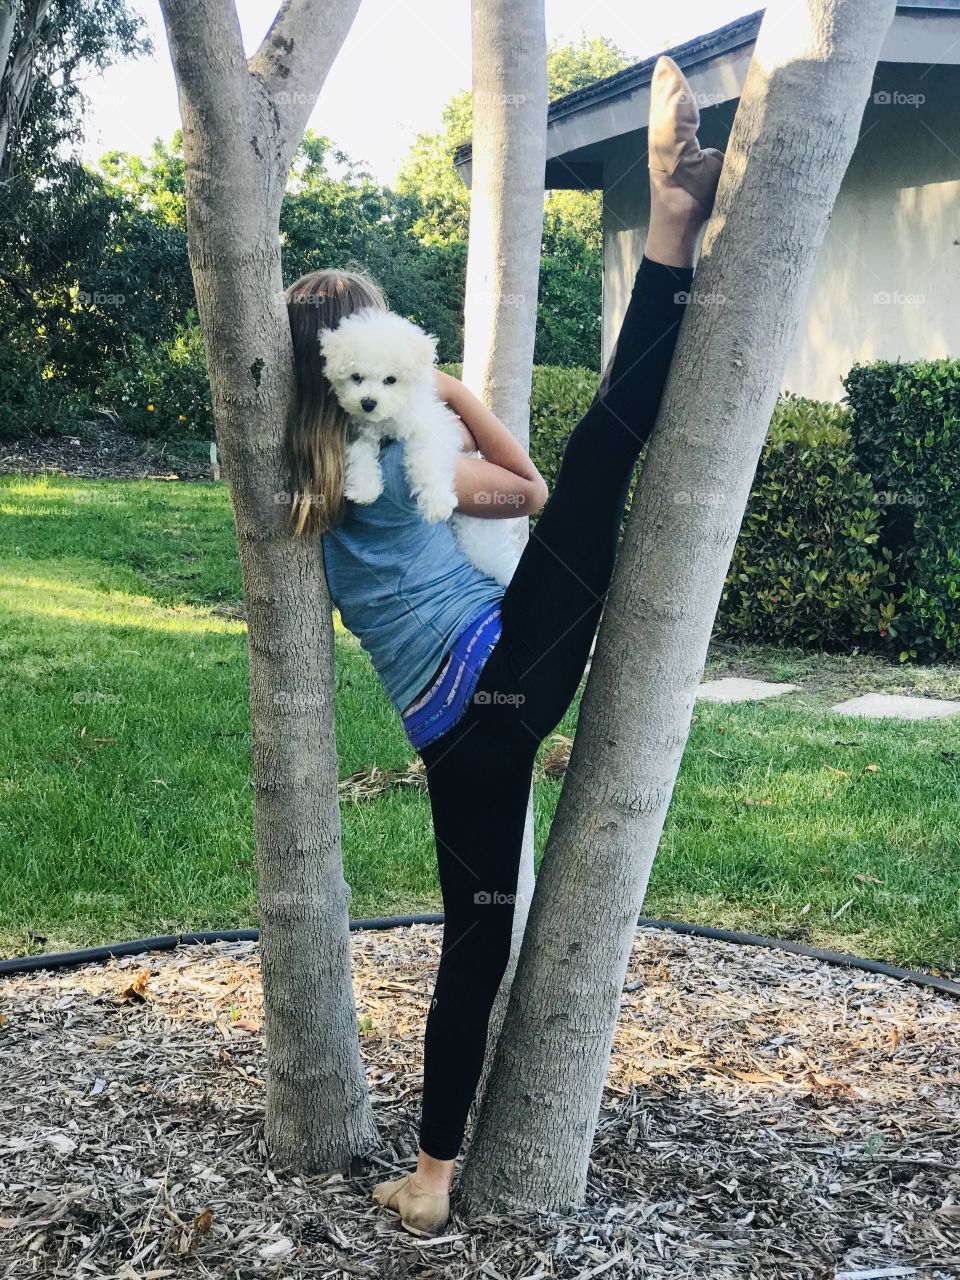 Athletic girl doing splits amid trees while holding Teddy the fluffy Bichon puppy boy.